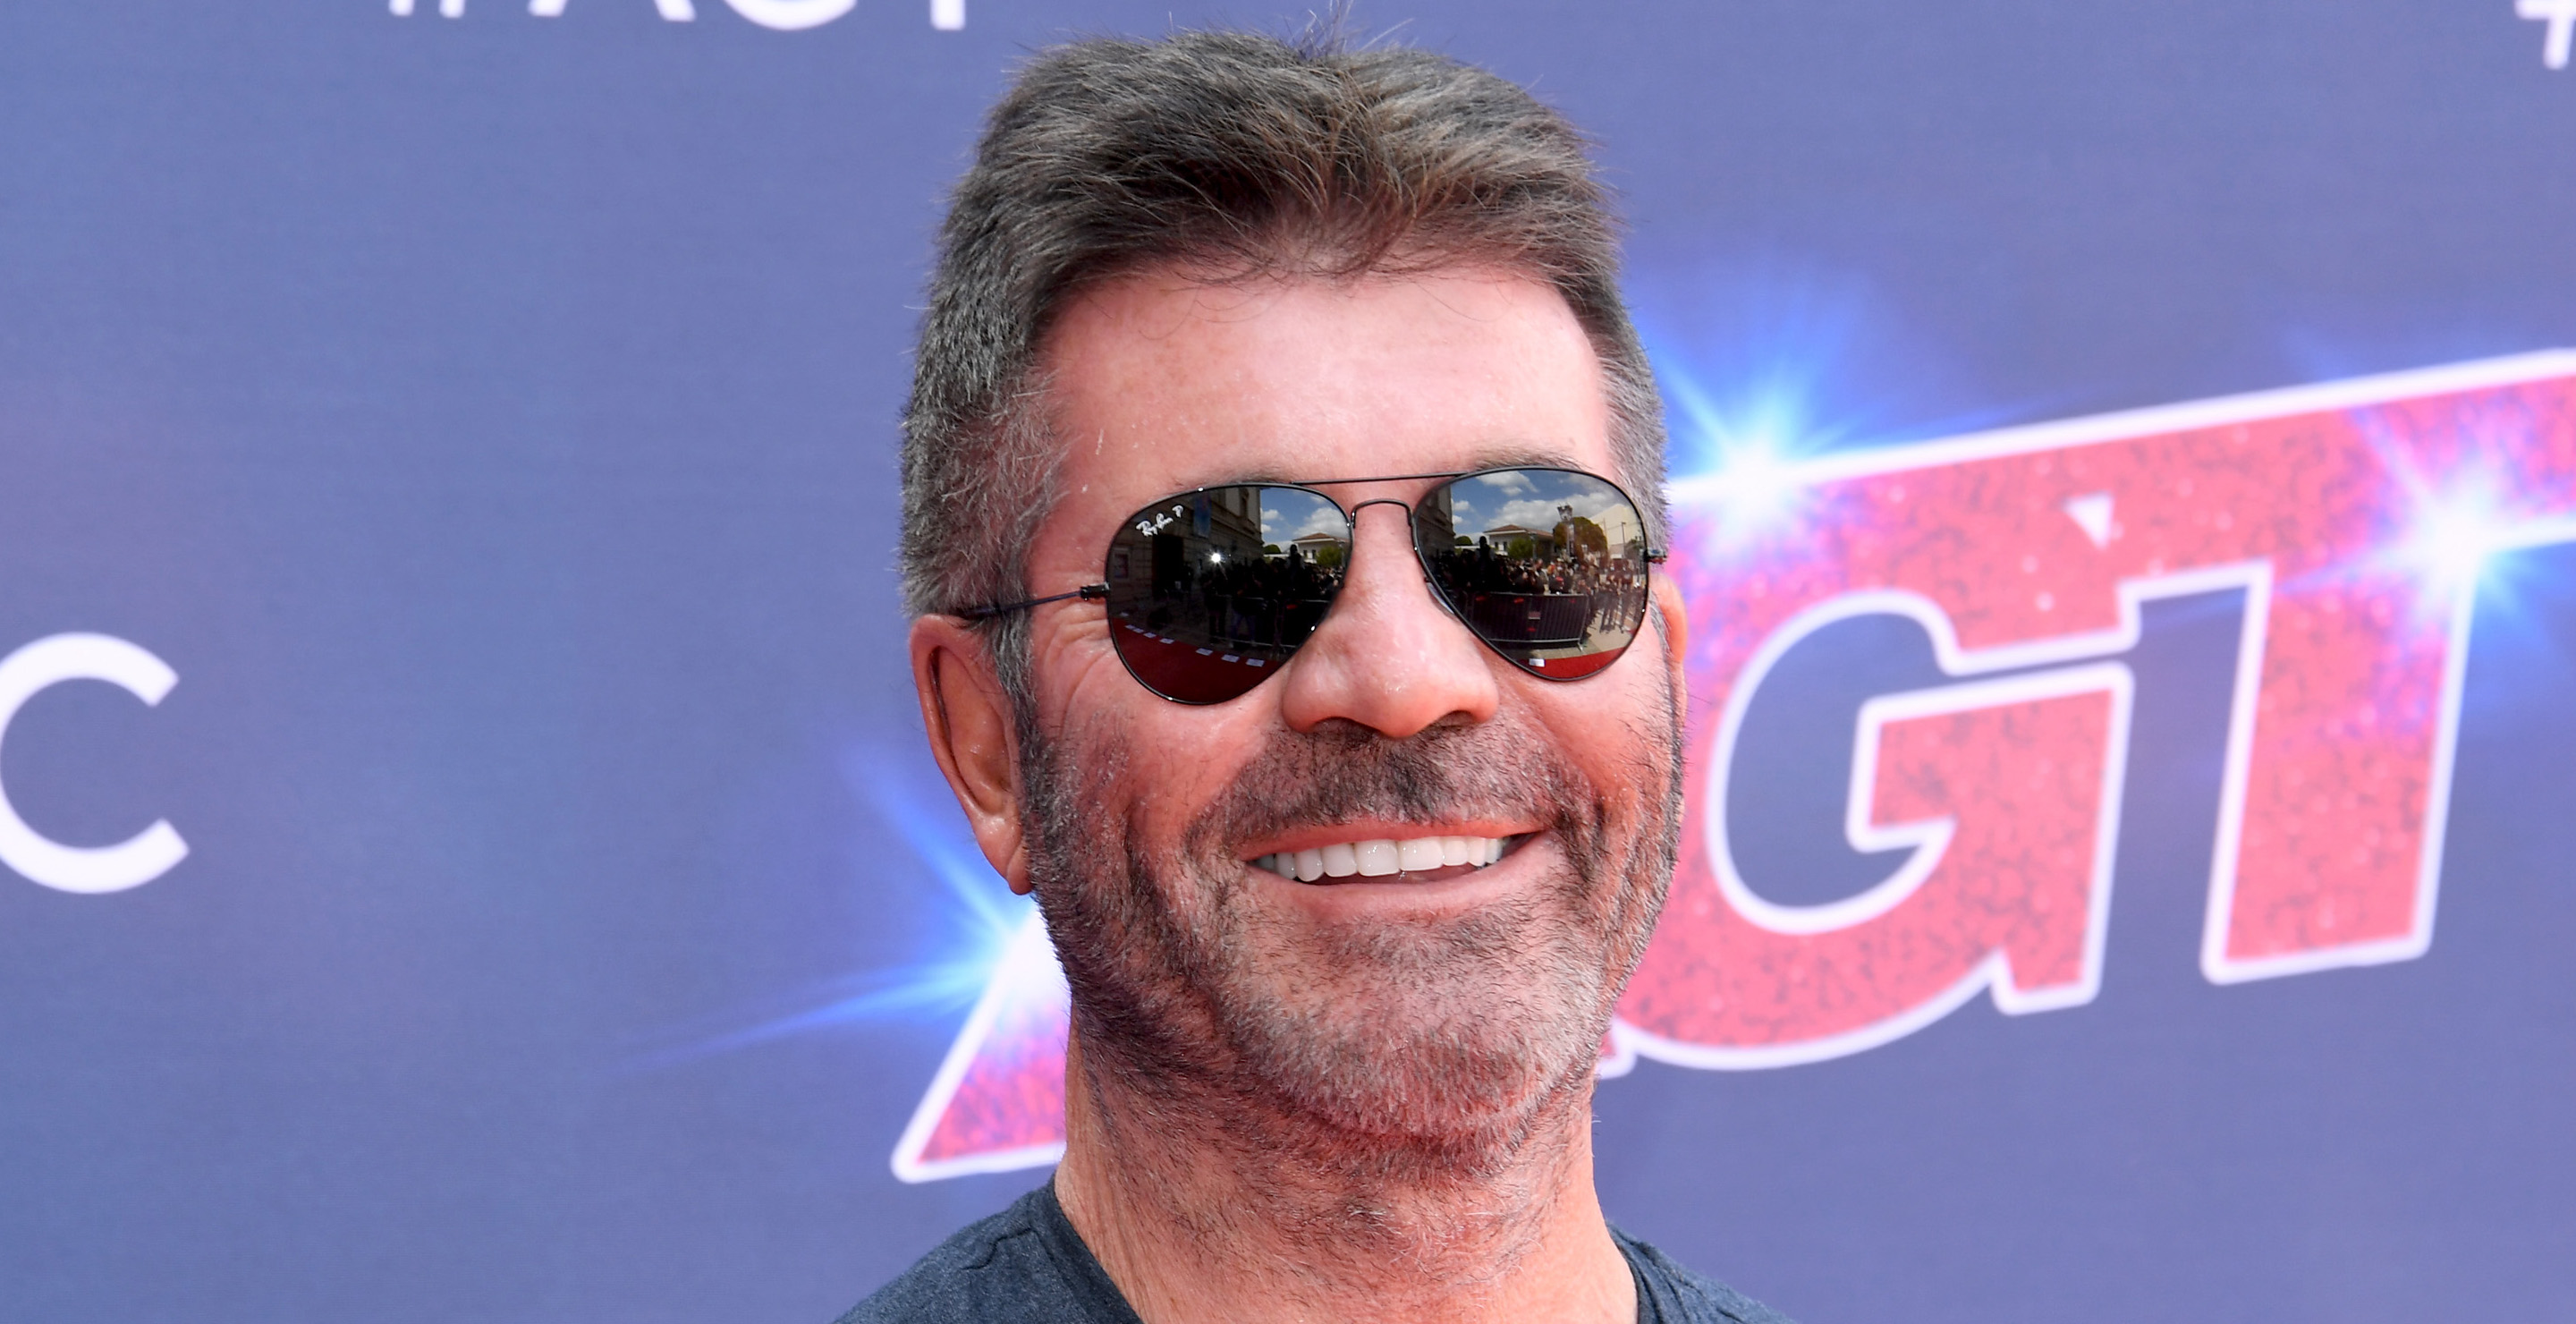 Simon-Cowell-Says-His-Son-Changed-Everything-Amidst-Death-of-His-Parents